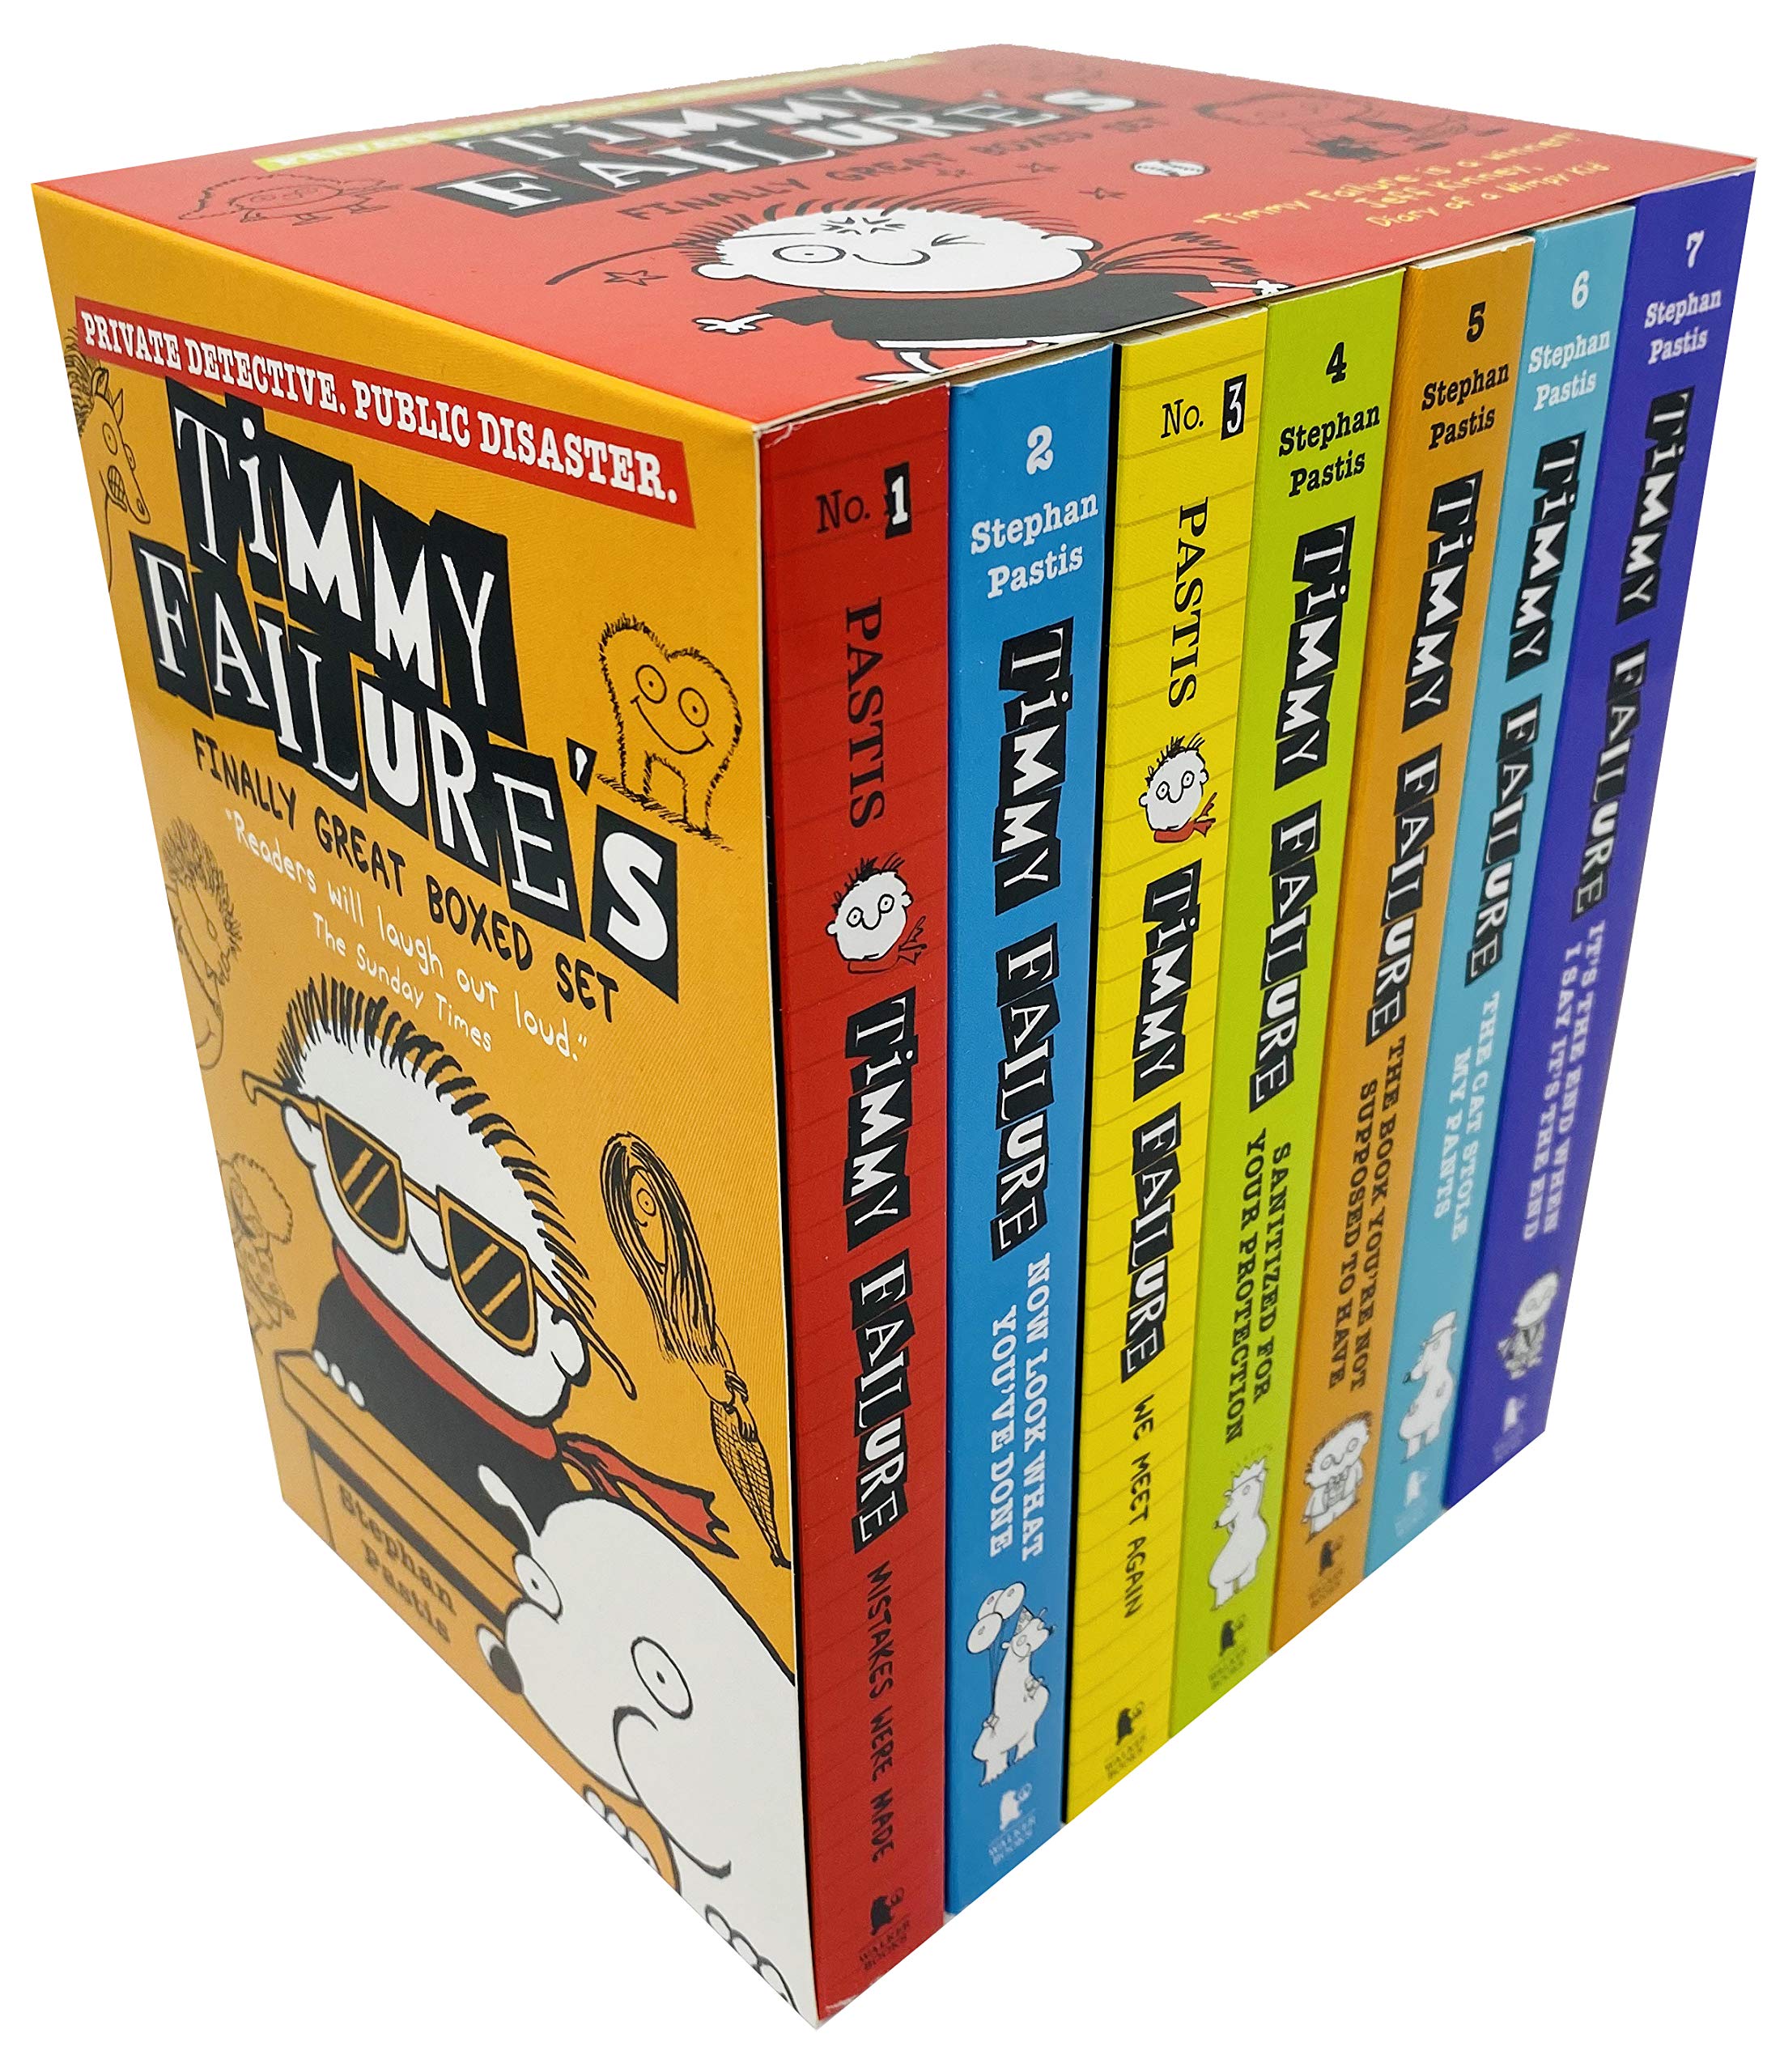 Timmy Failure's Finally Great Boxed Set Volume 1-7 Books Set Collection Series Paperback - Lets Buy Books